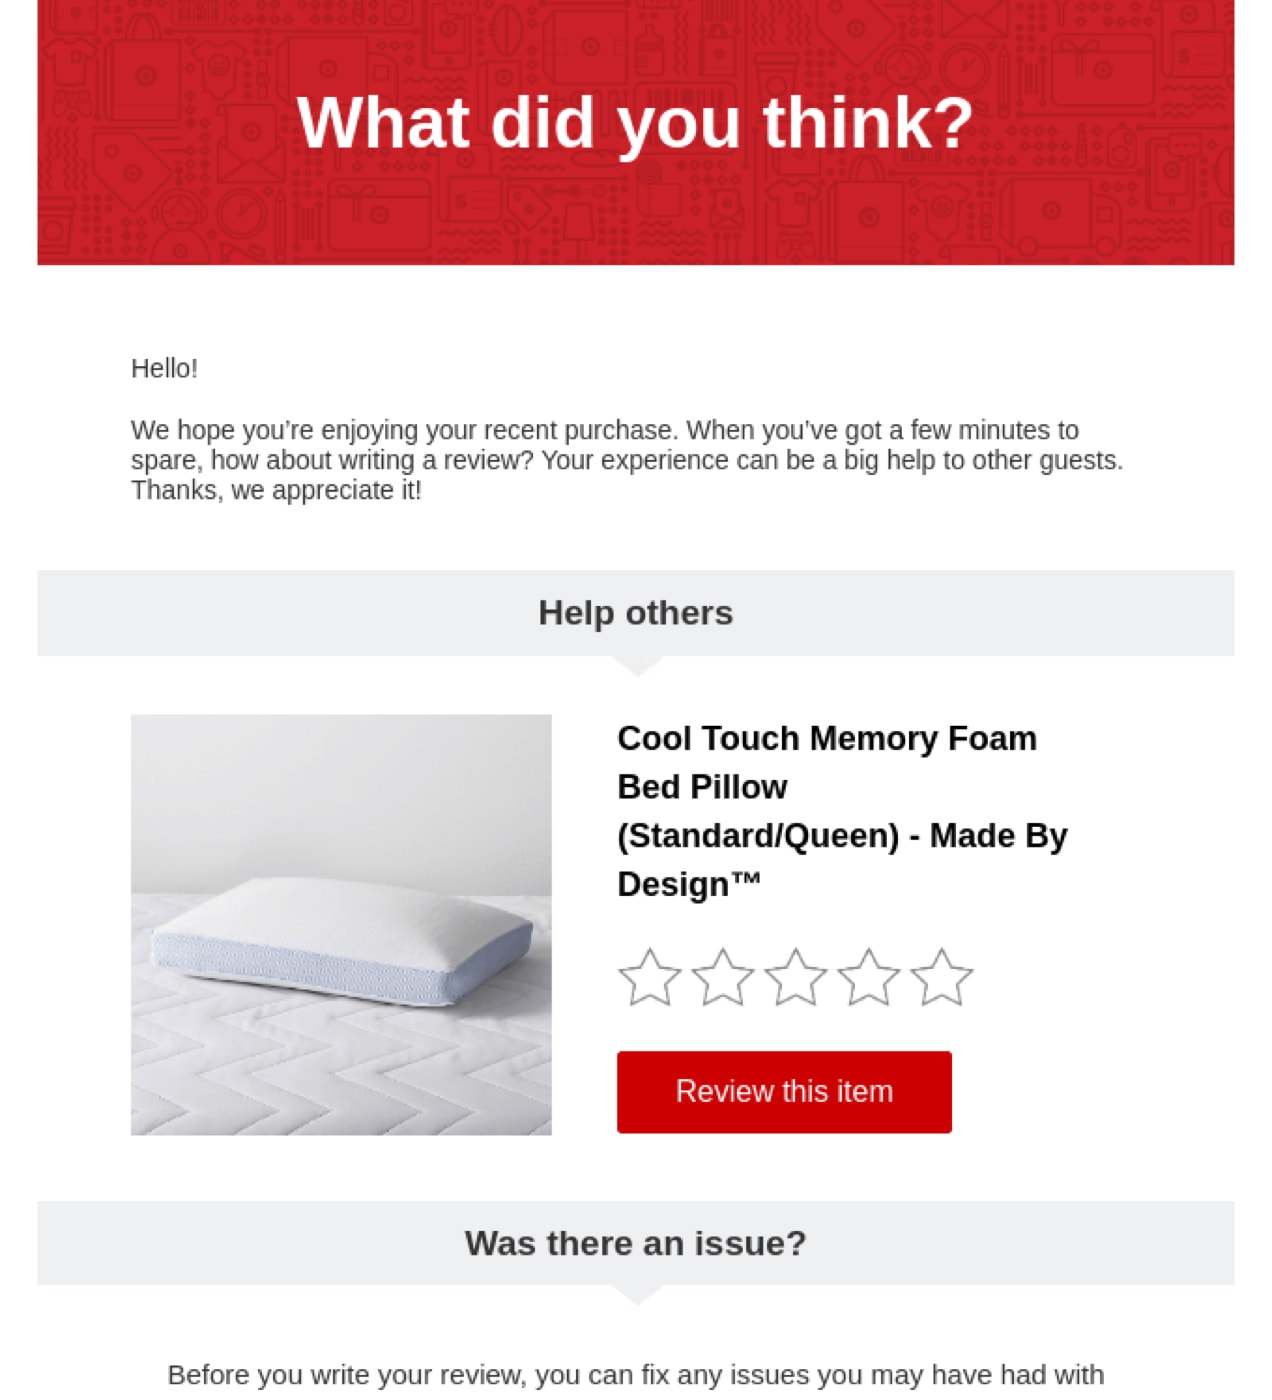 Target email asking for a product review of a memory foam bed pillow